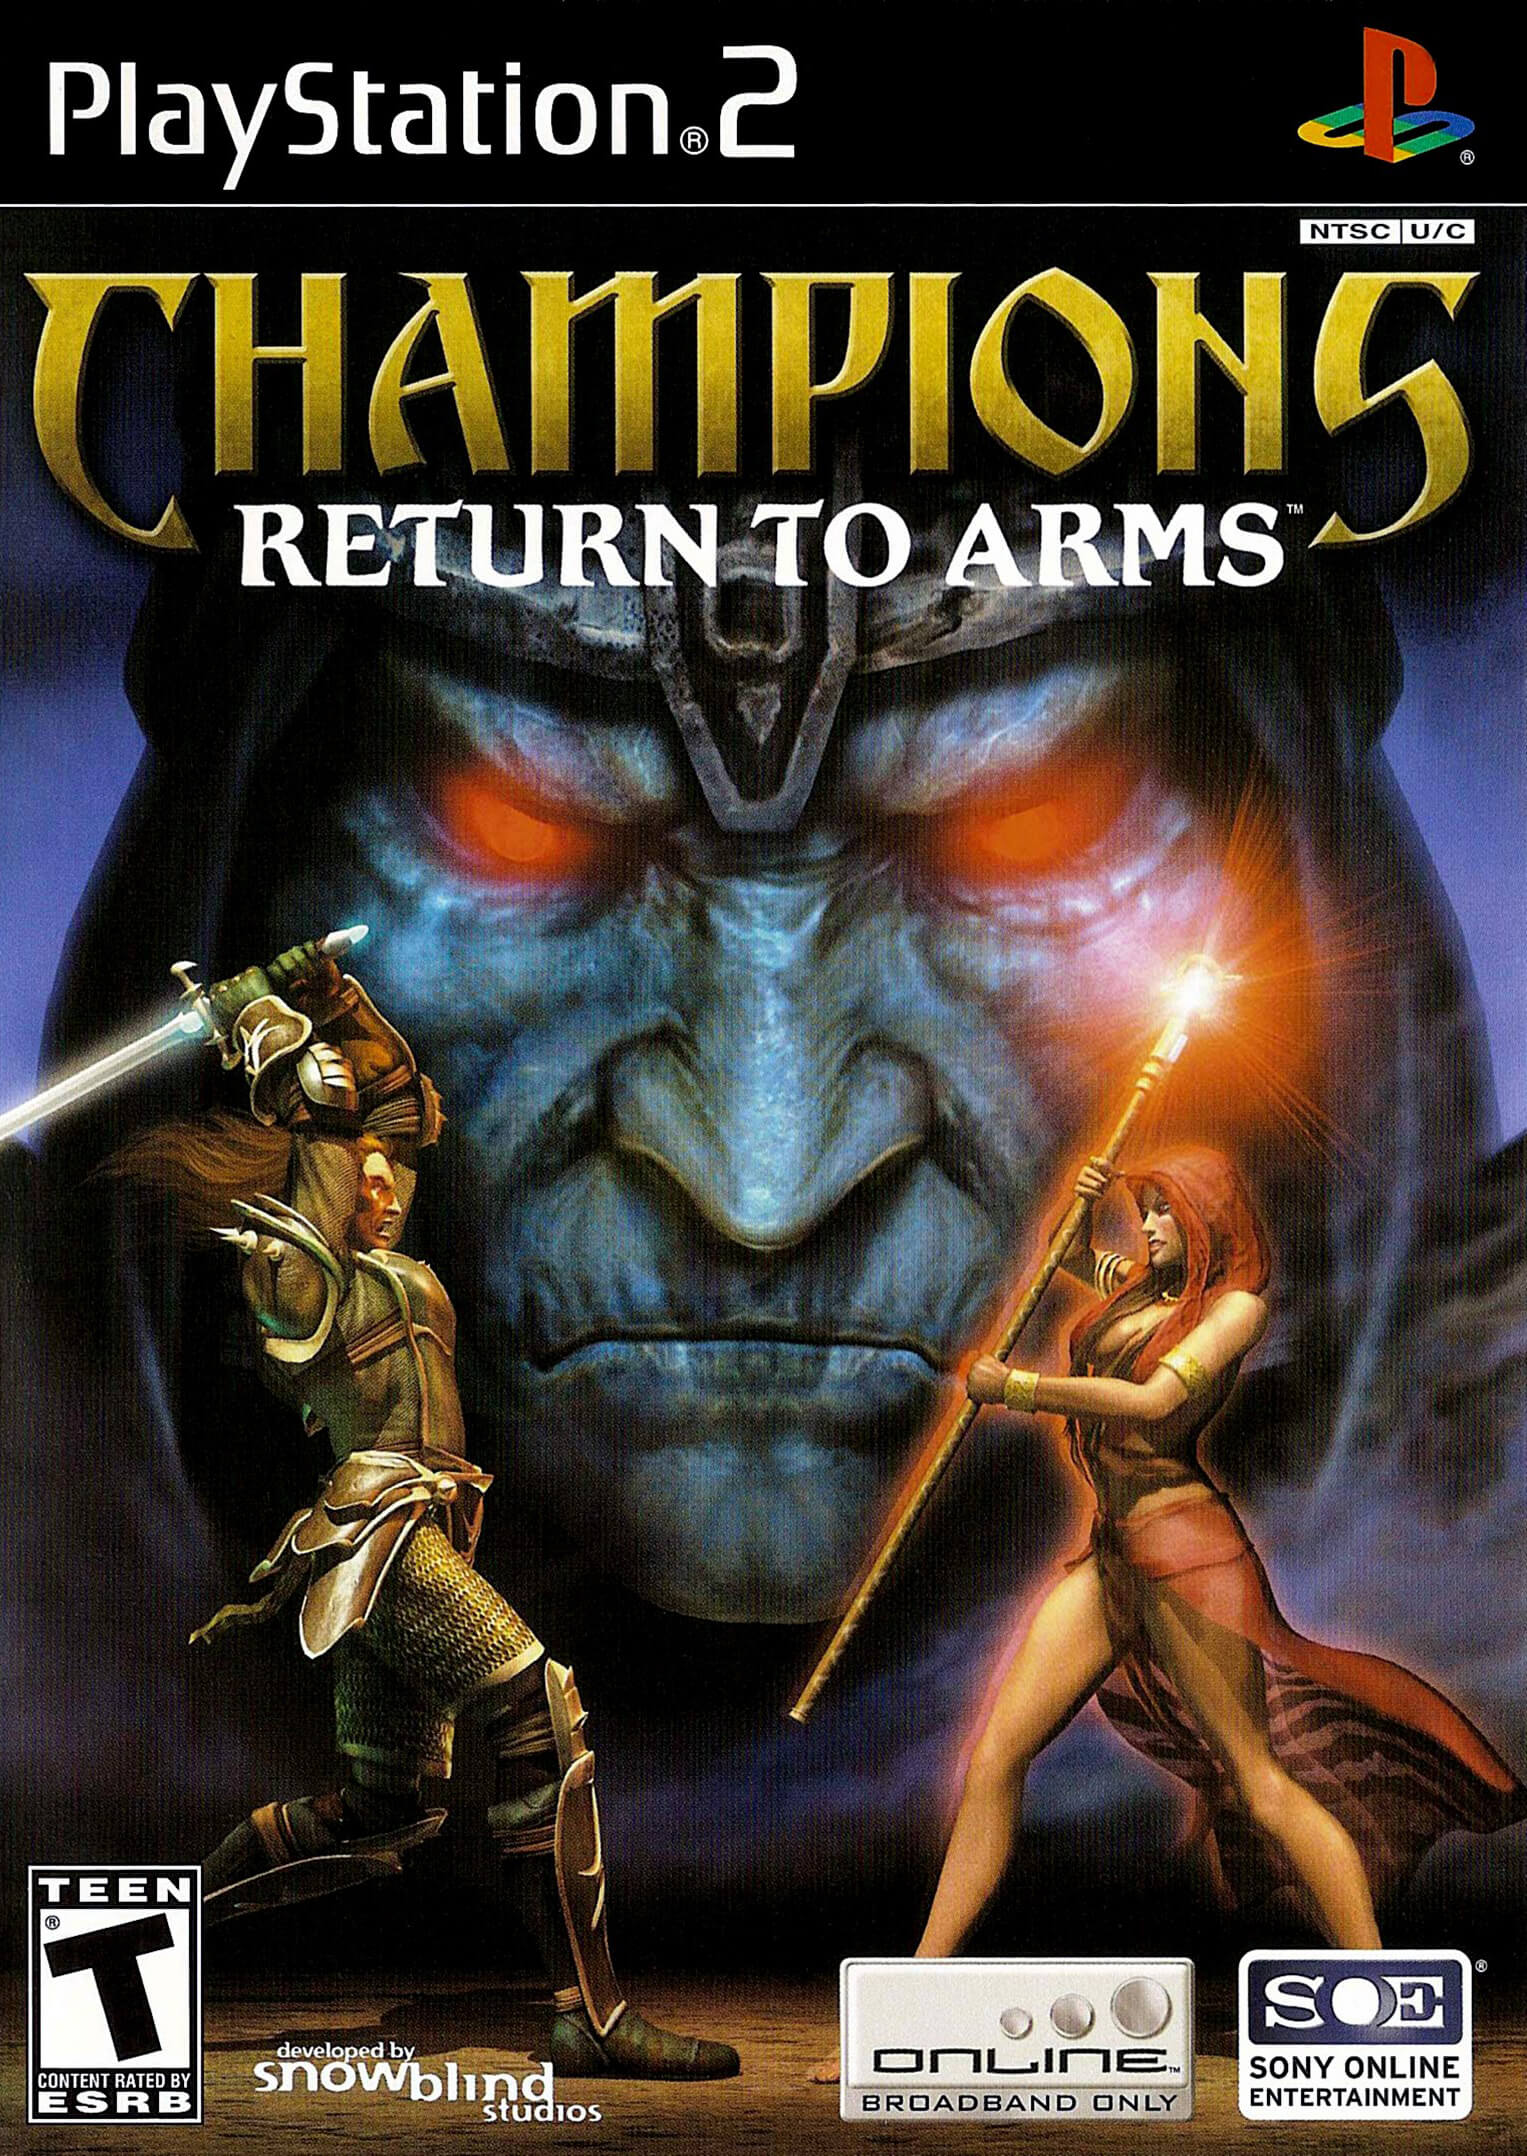 CHAMPIONS OF NORRATH - Playstation 2 (PS2) iso download